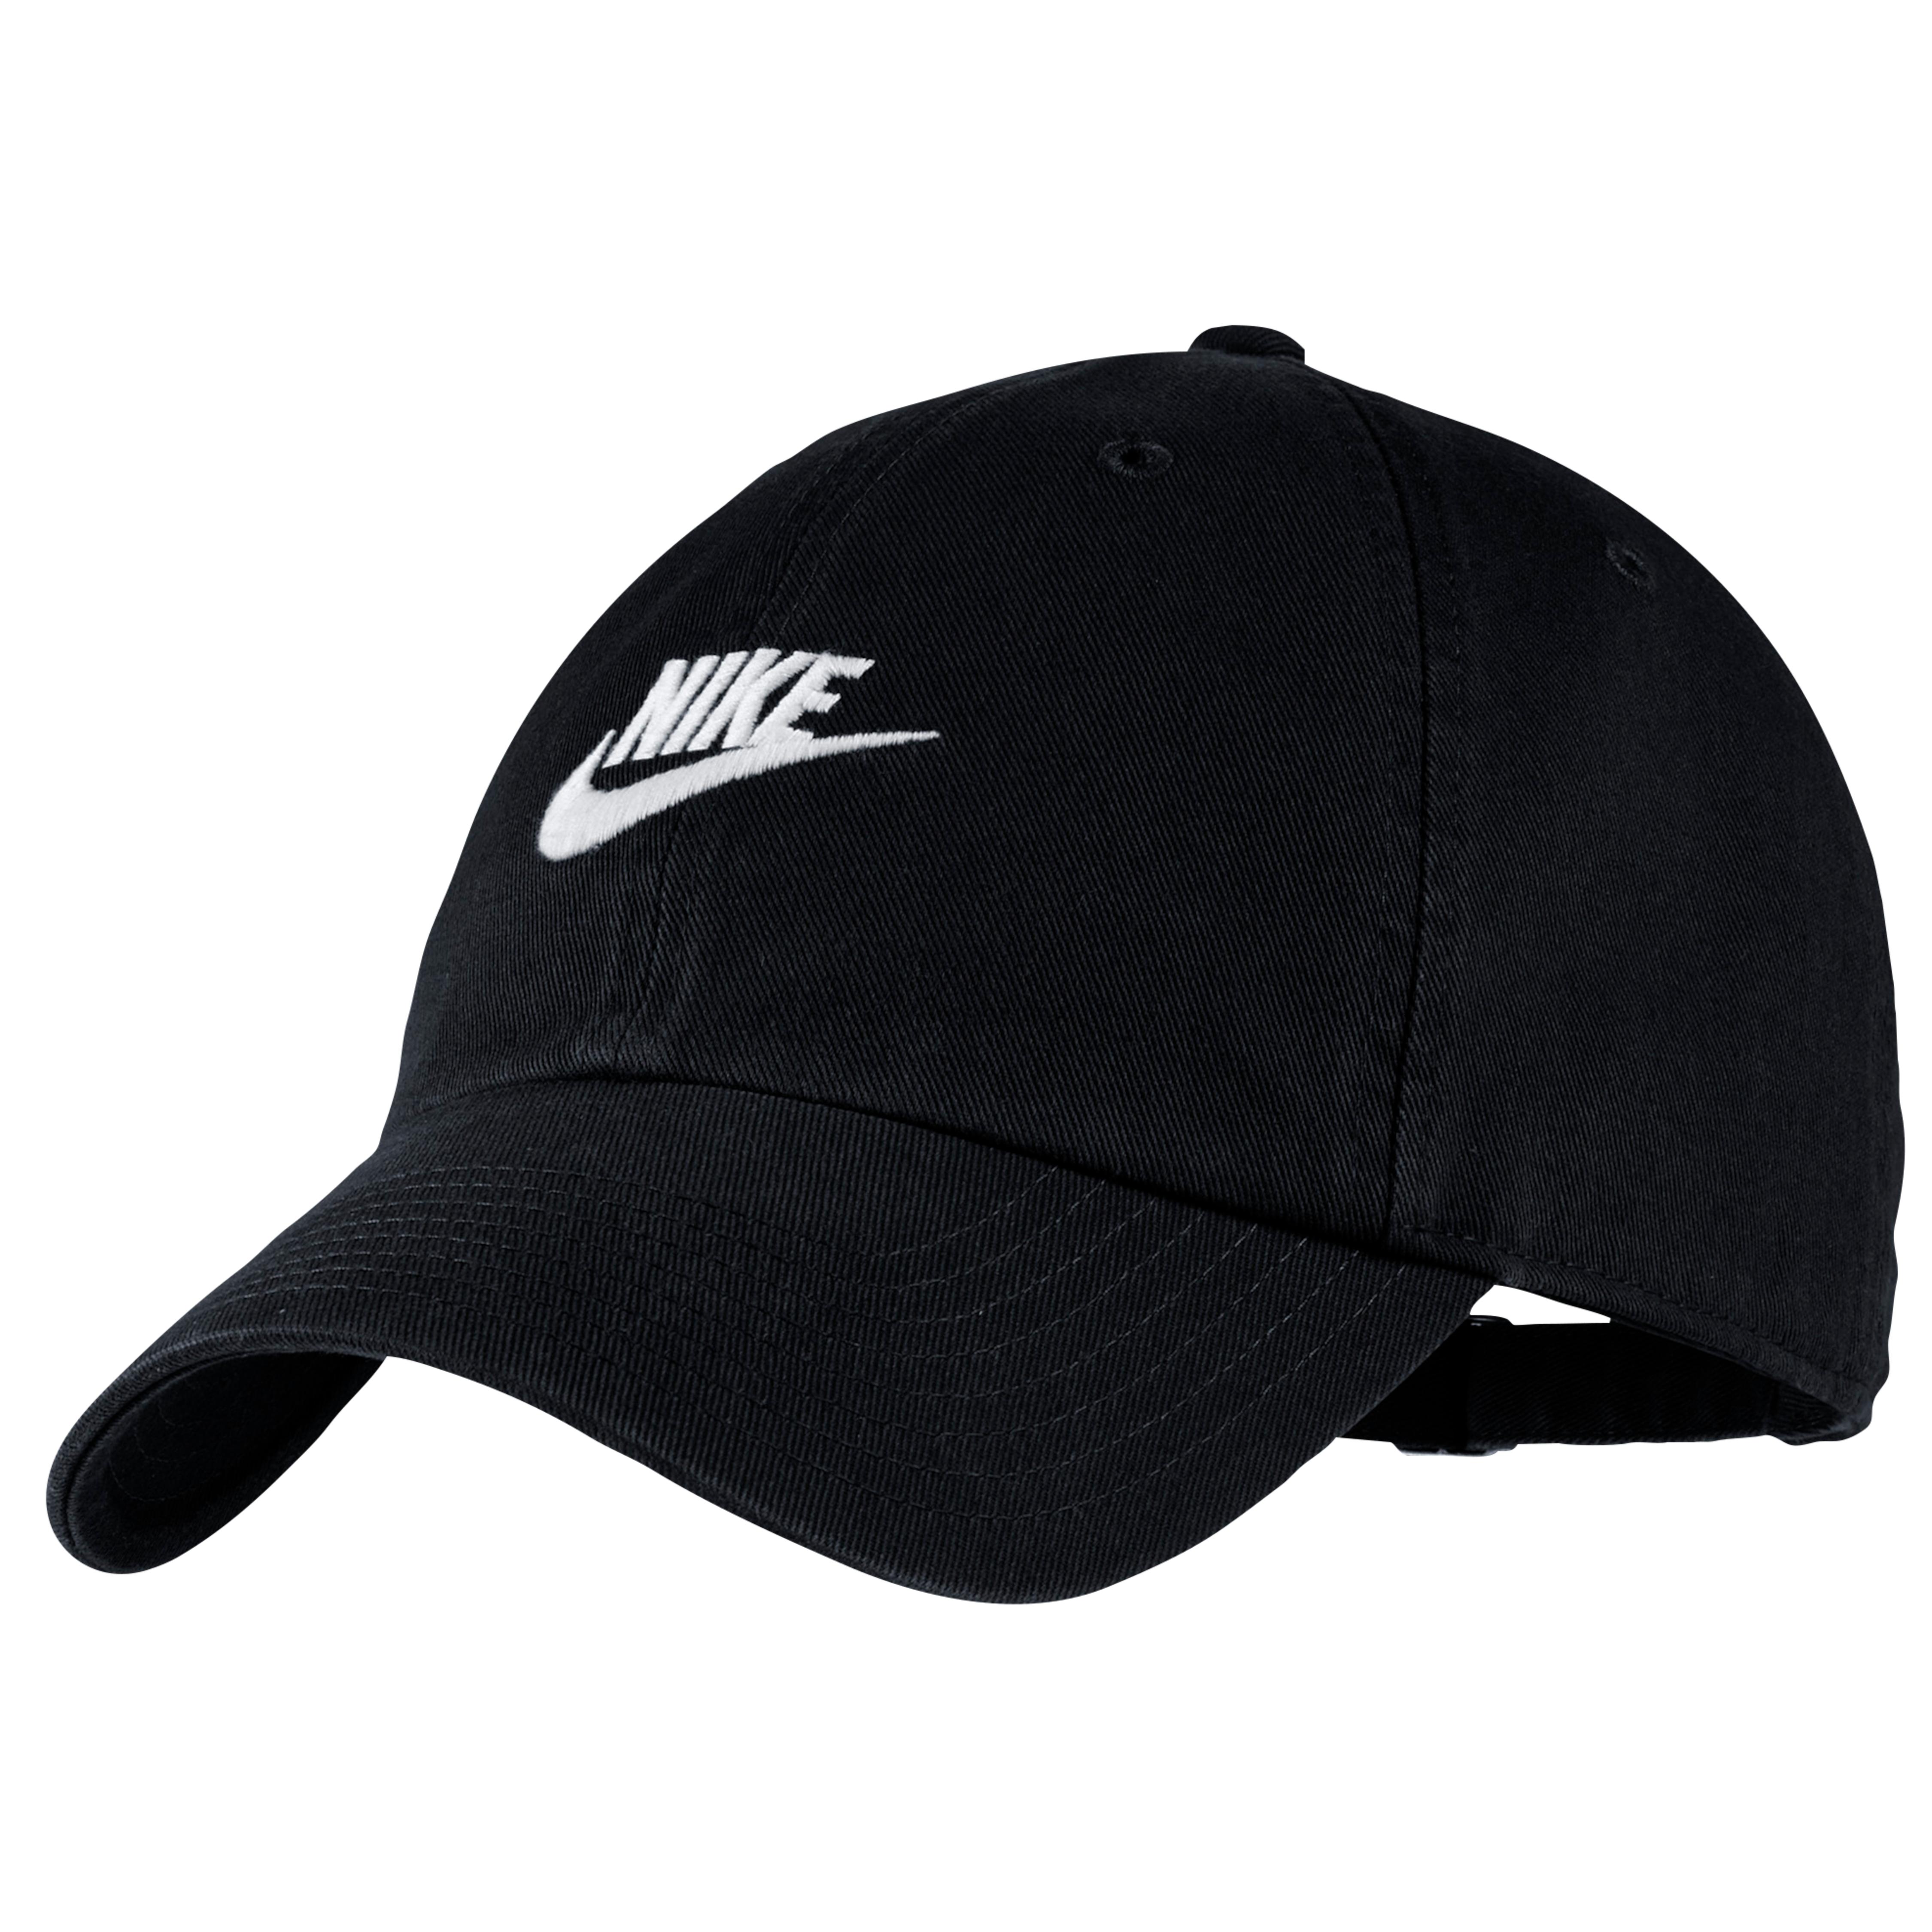 Nike Synthetic Aerobill Tailwind Cap in Black/White (Blue) for Men ...